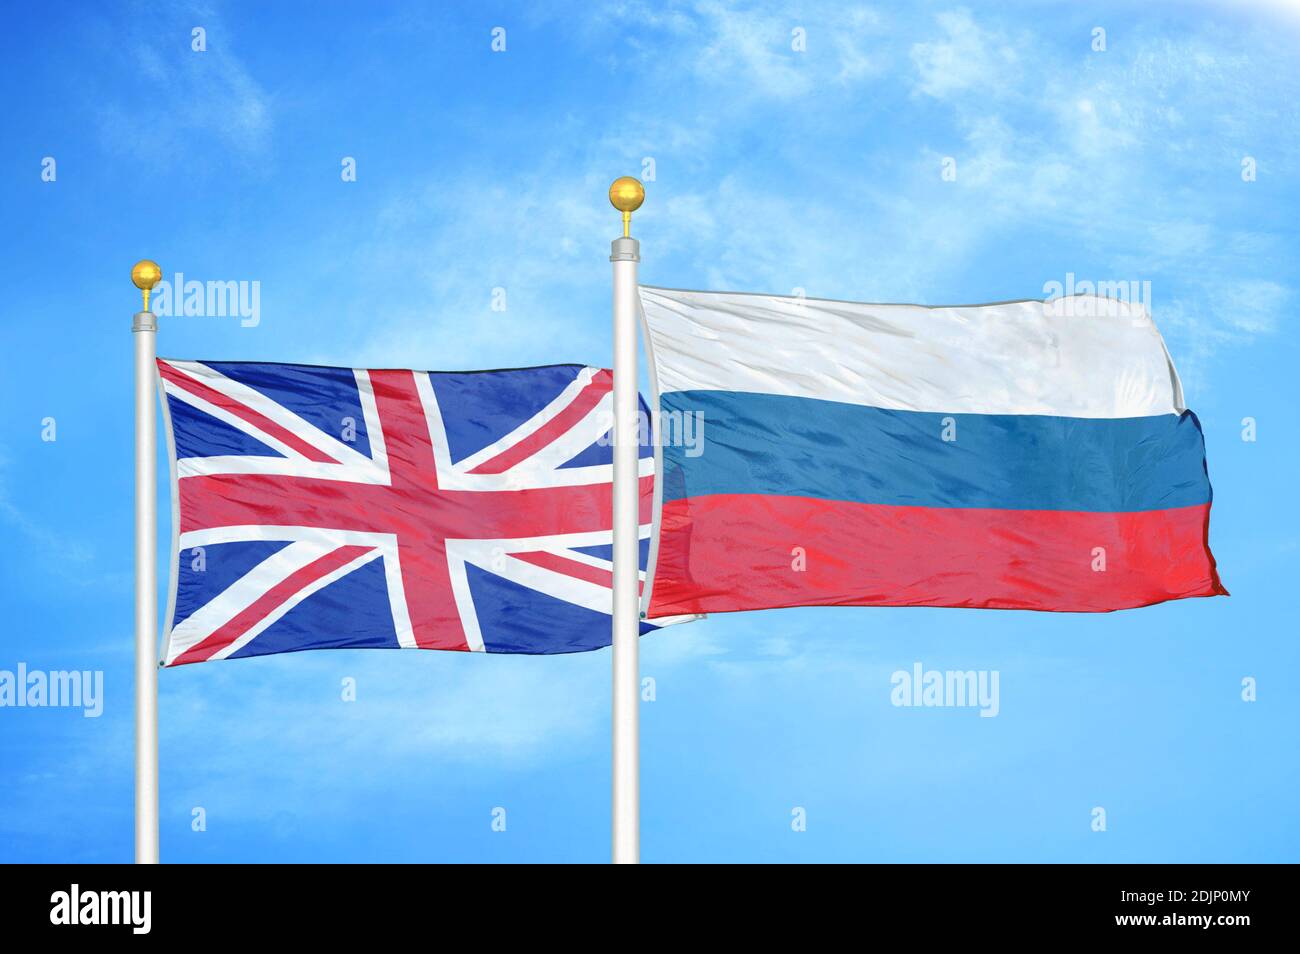 United Kingdom and Russia two flags on flagpoles and blue cloudy sky Stock Photo